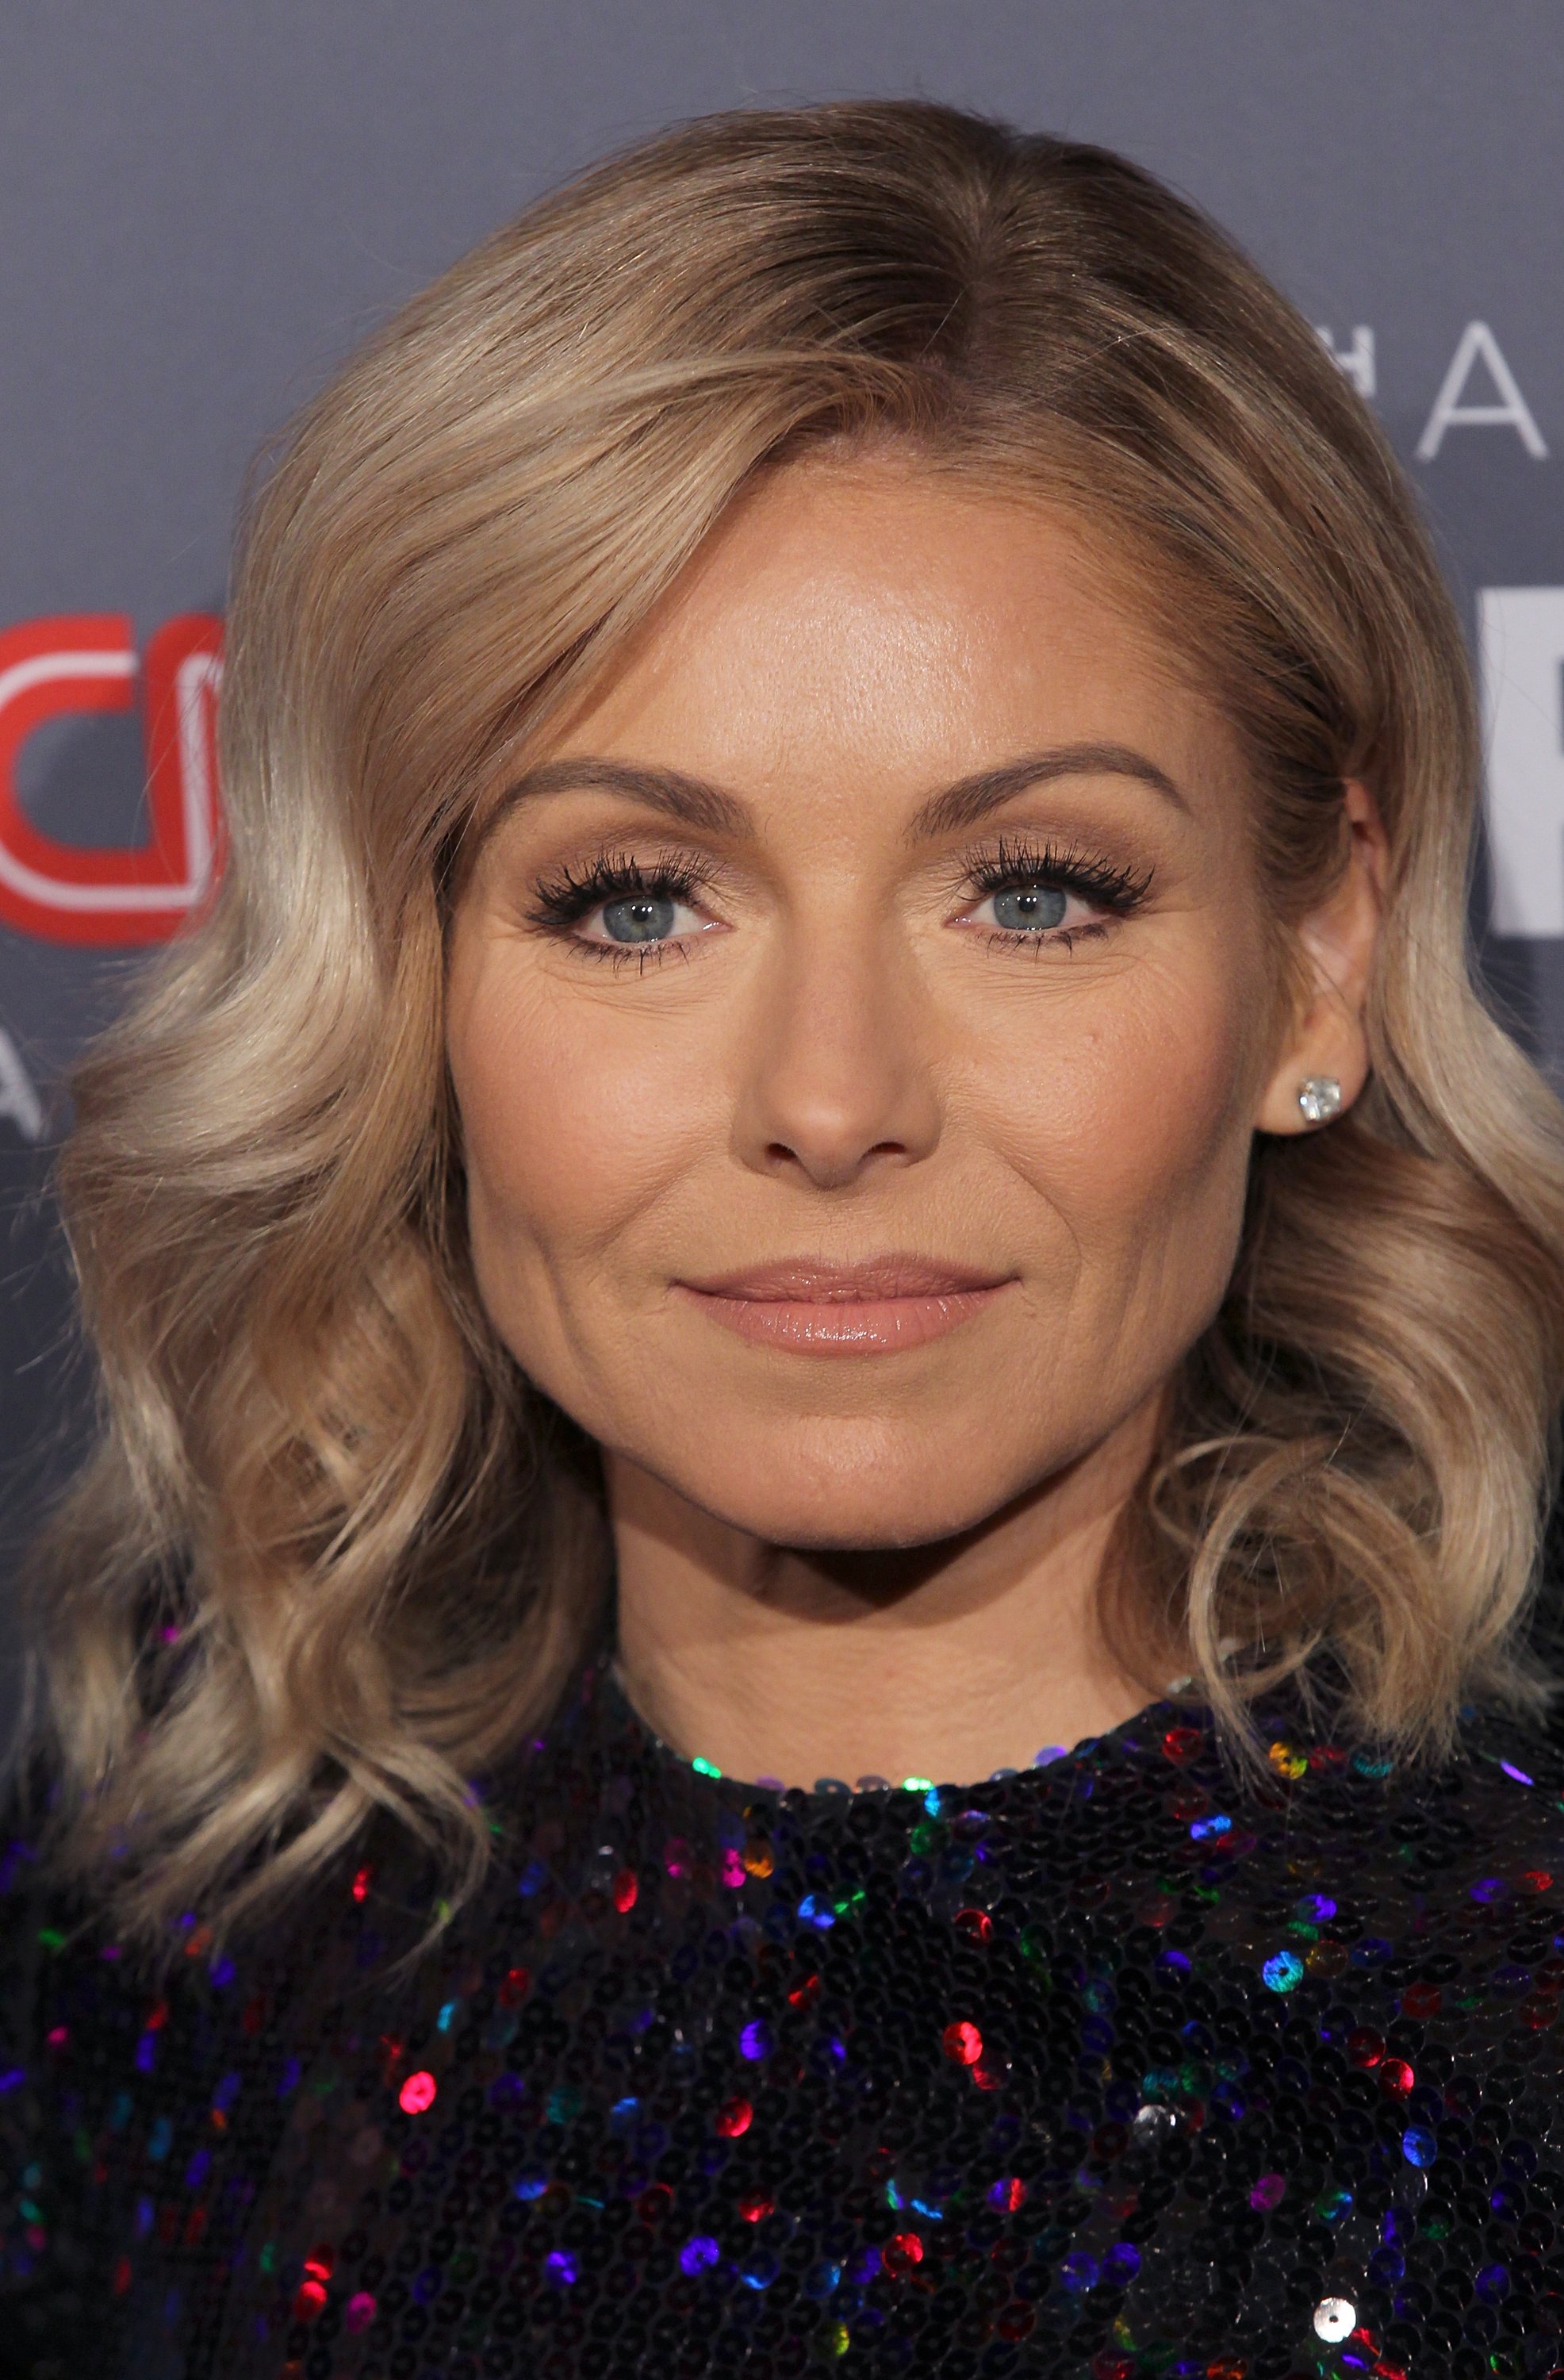 TV personality Kelly Ripa attends the 10th Anniversary CNN Heroes at American Museum of Natural History on December 11, 2016 in New York City. | Source: Getty Images